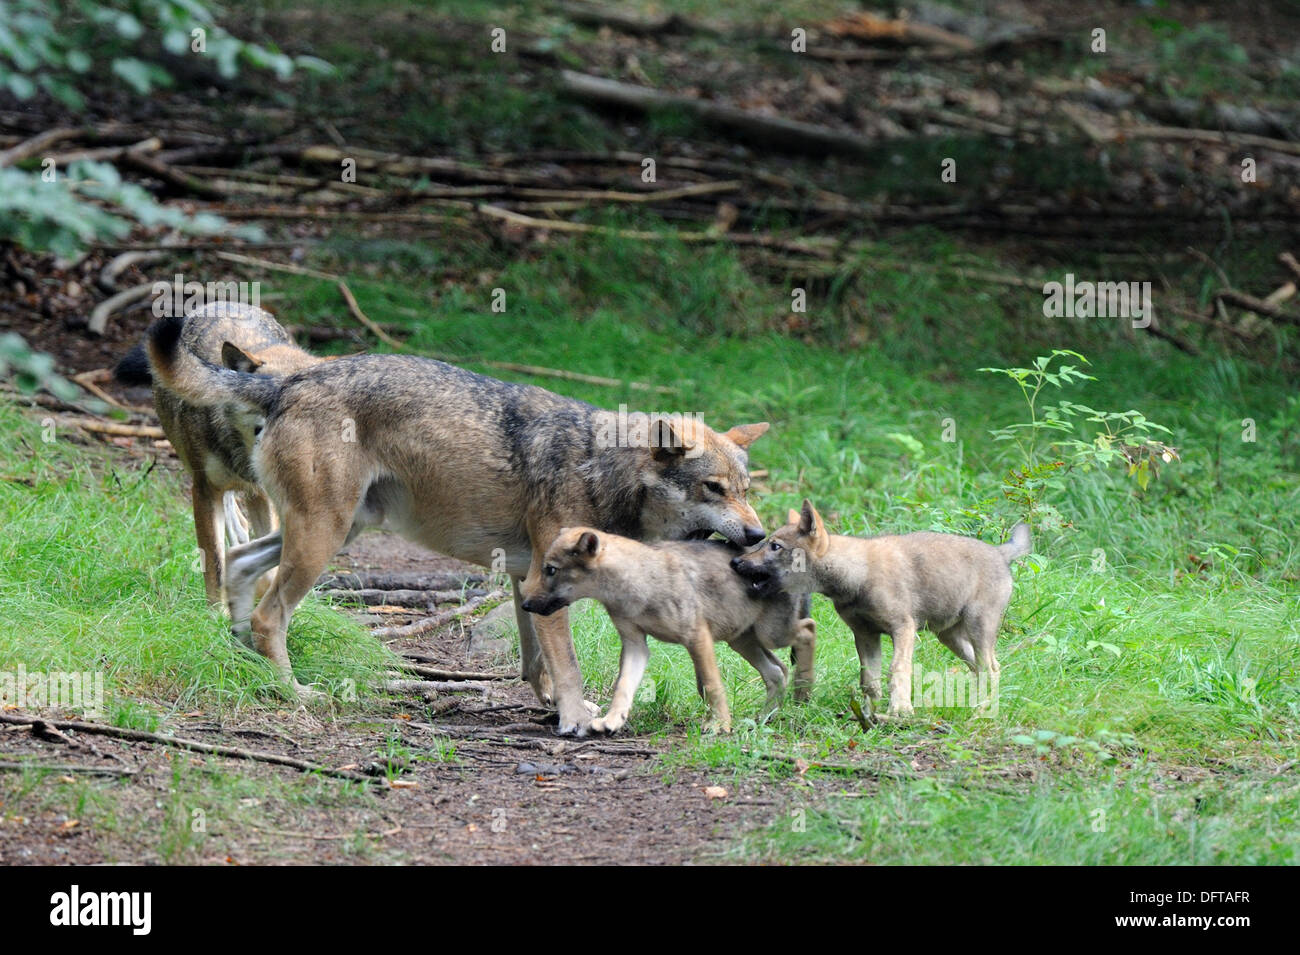 European grey wolf adult playing with pups aged 2 months old Canis lupus captive, Bayerischerwald National Park, Germany Stock Photo